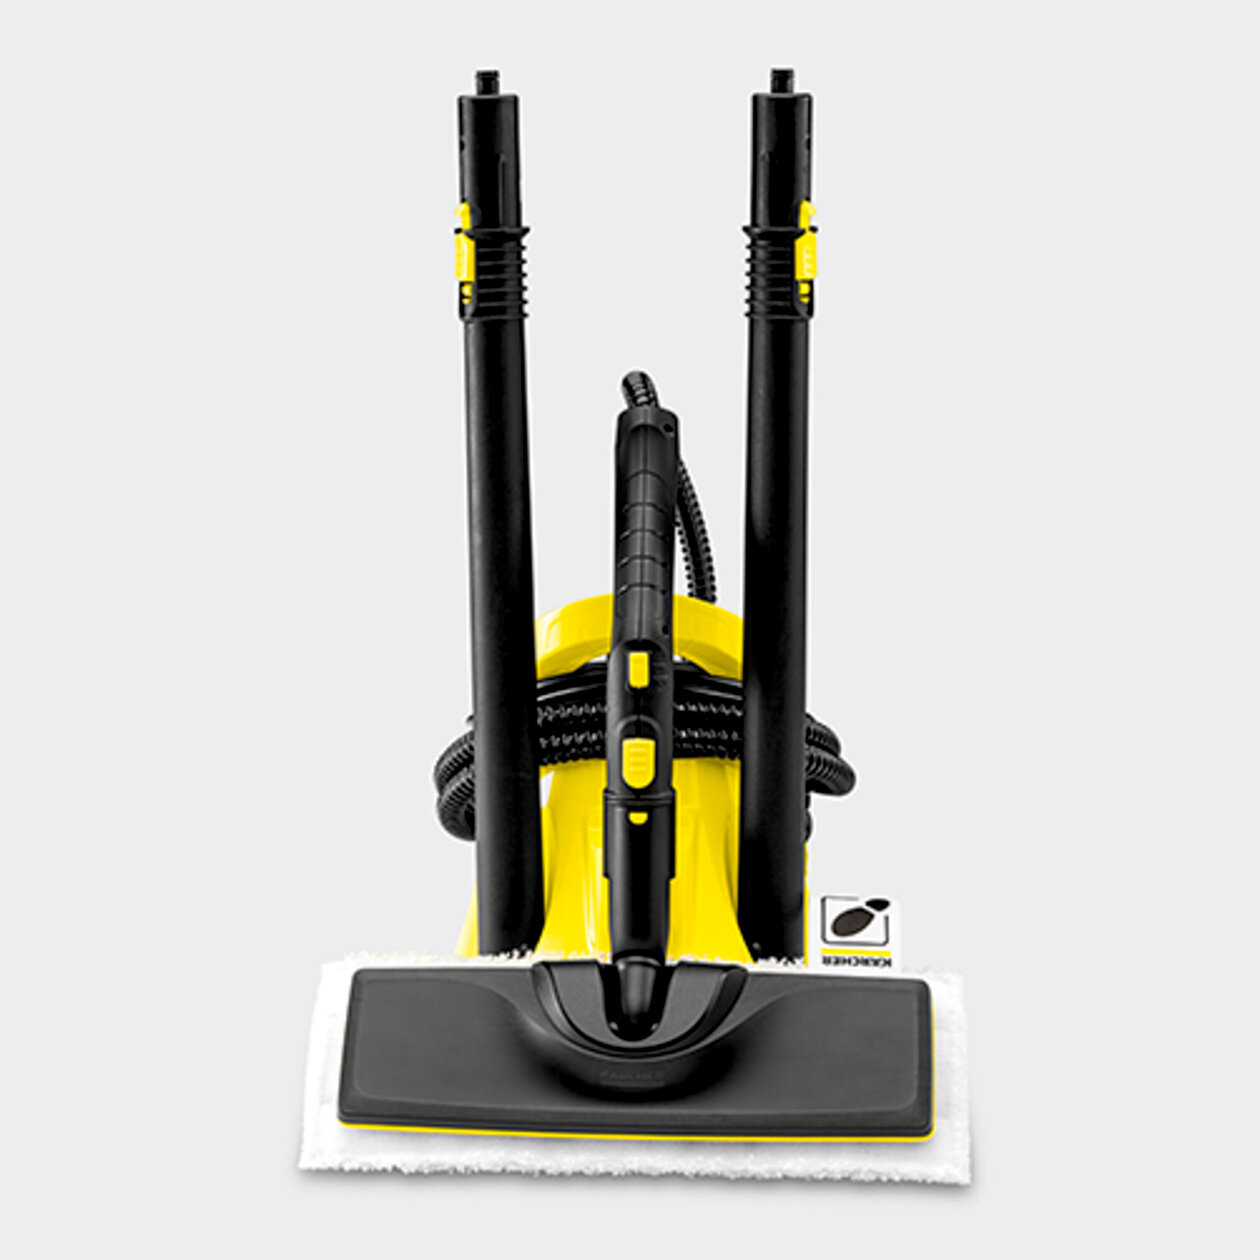 Steam cleaner SC 2 Deluxe EasyFix: Orderly accessory storage and parking position